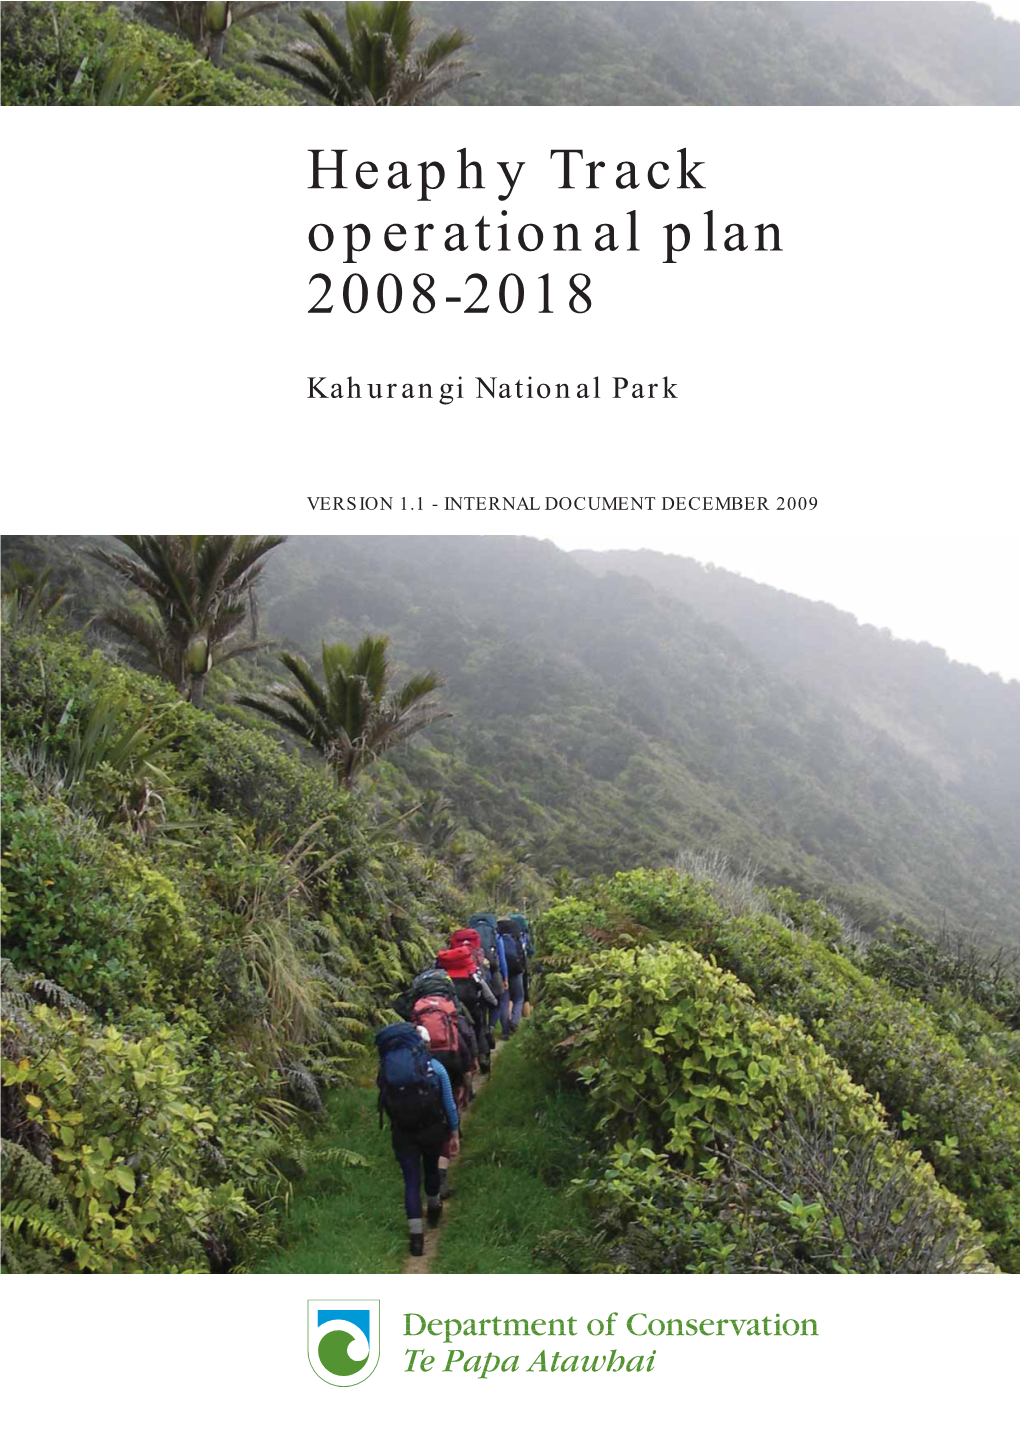 Heaphy Track Operational Plan 2008 to 2018